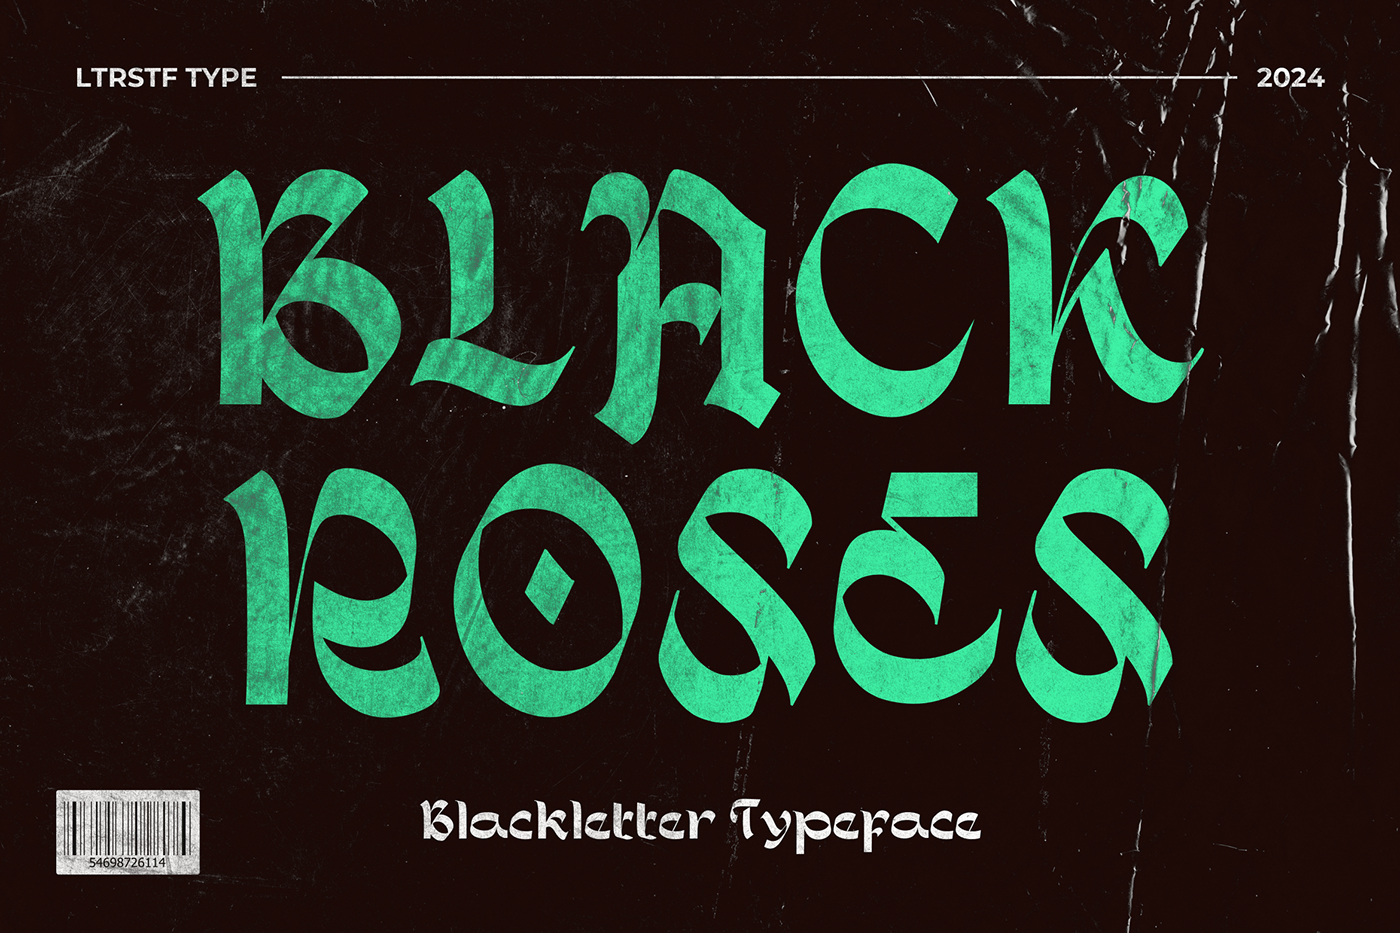 font display font Typeface gothic Blackletter Calligraphy  